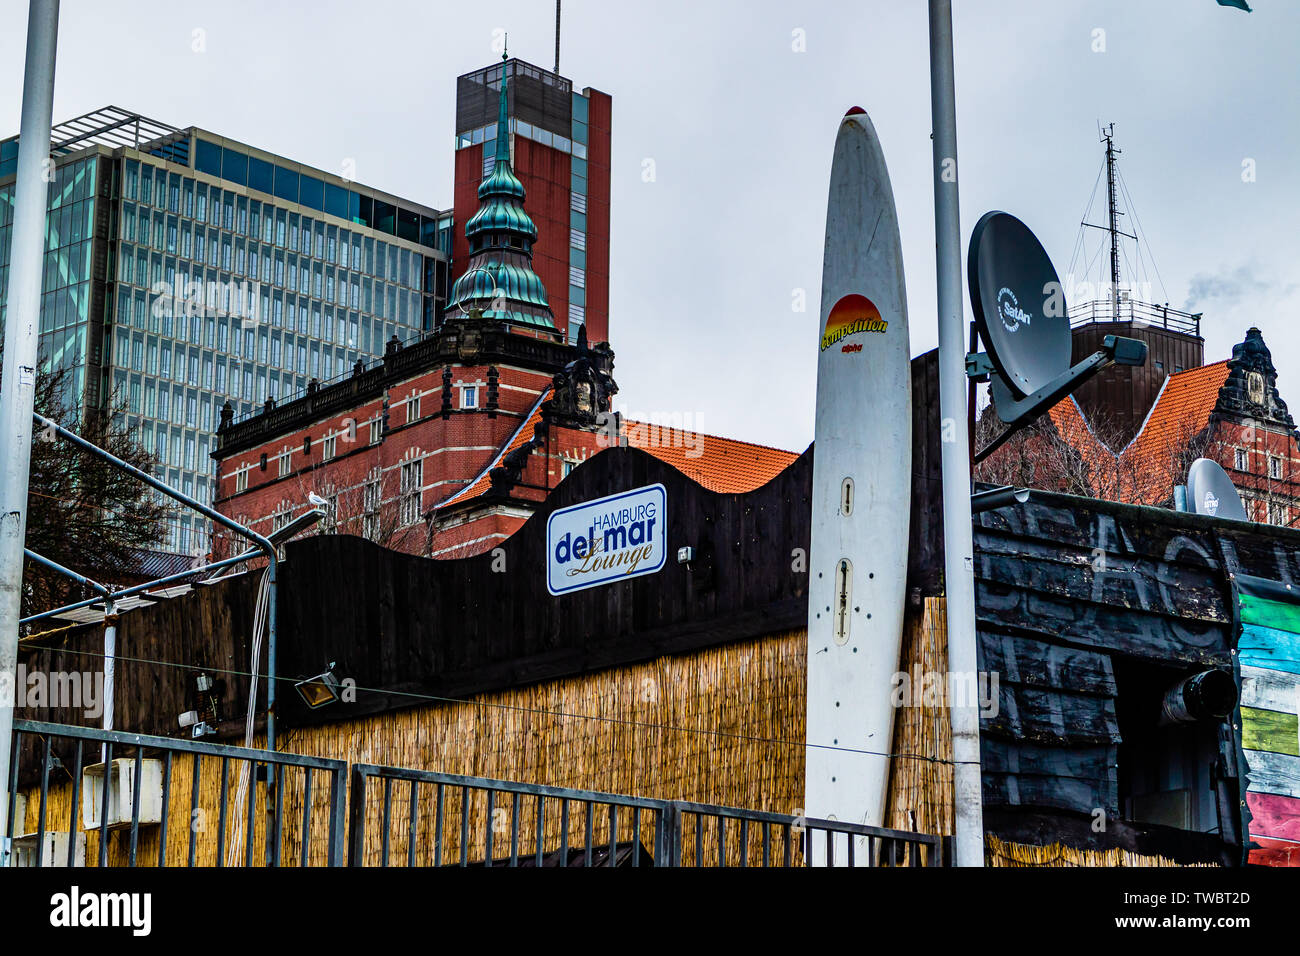 Beach bar closed for the winter on the quay of the River Elbe at St Pauli, Hamburg, Germany. January 2019. Stock Photo